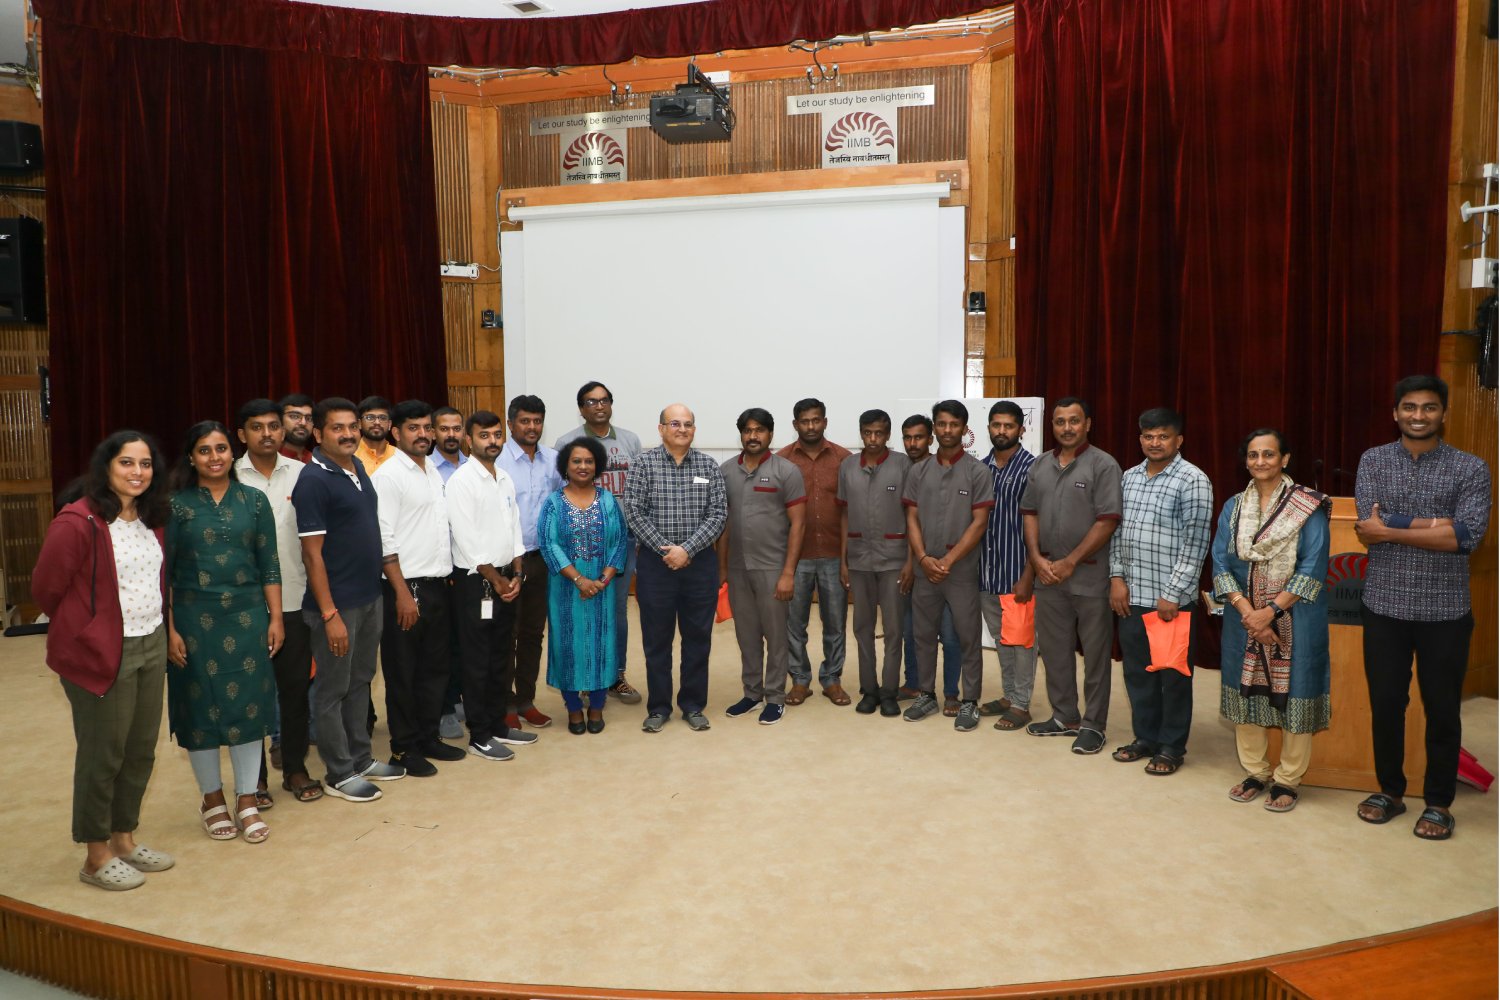 Vikasana, the students’ social impact society at IIMB, organized ‘Dhanyawadagalu 2023’, on 6th July, to express their thanks to the staff workers at the Institute for their support and service. Professor Rishikesha T Krishnan, Director, IIMB, presented gifts to all the staff.